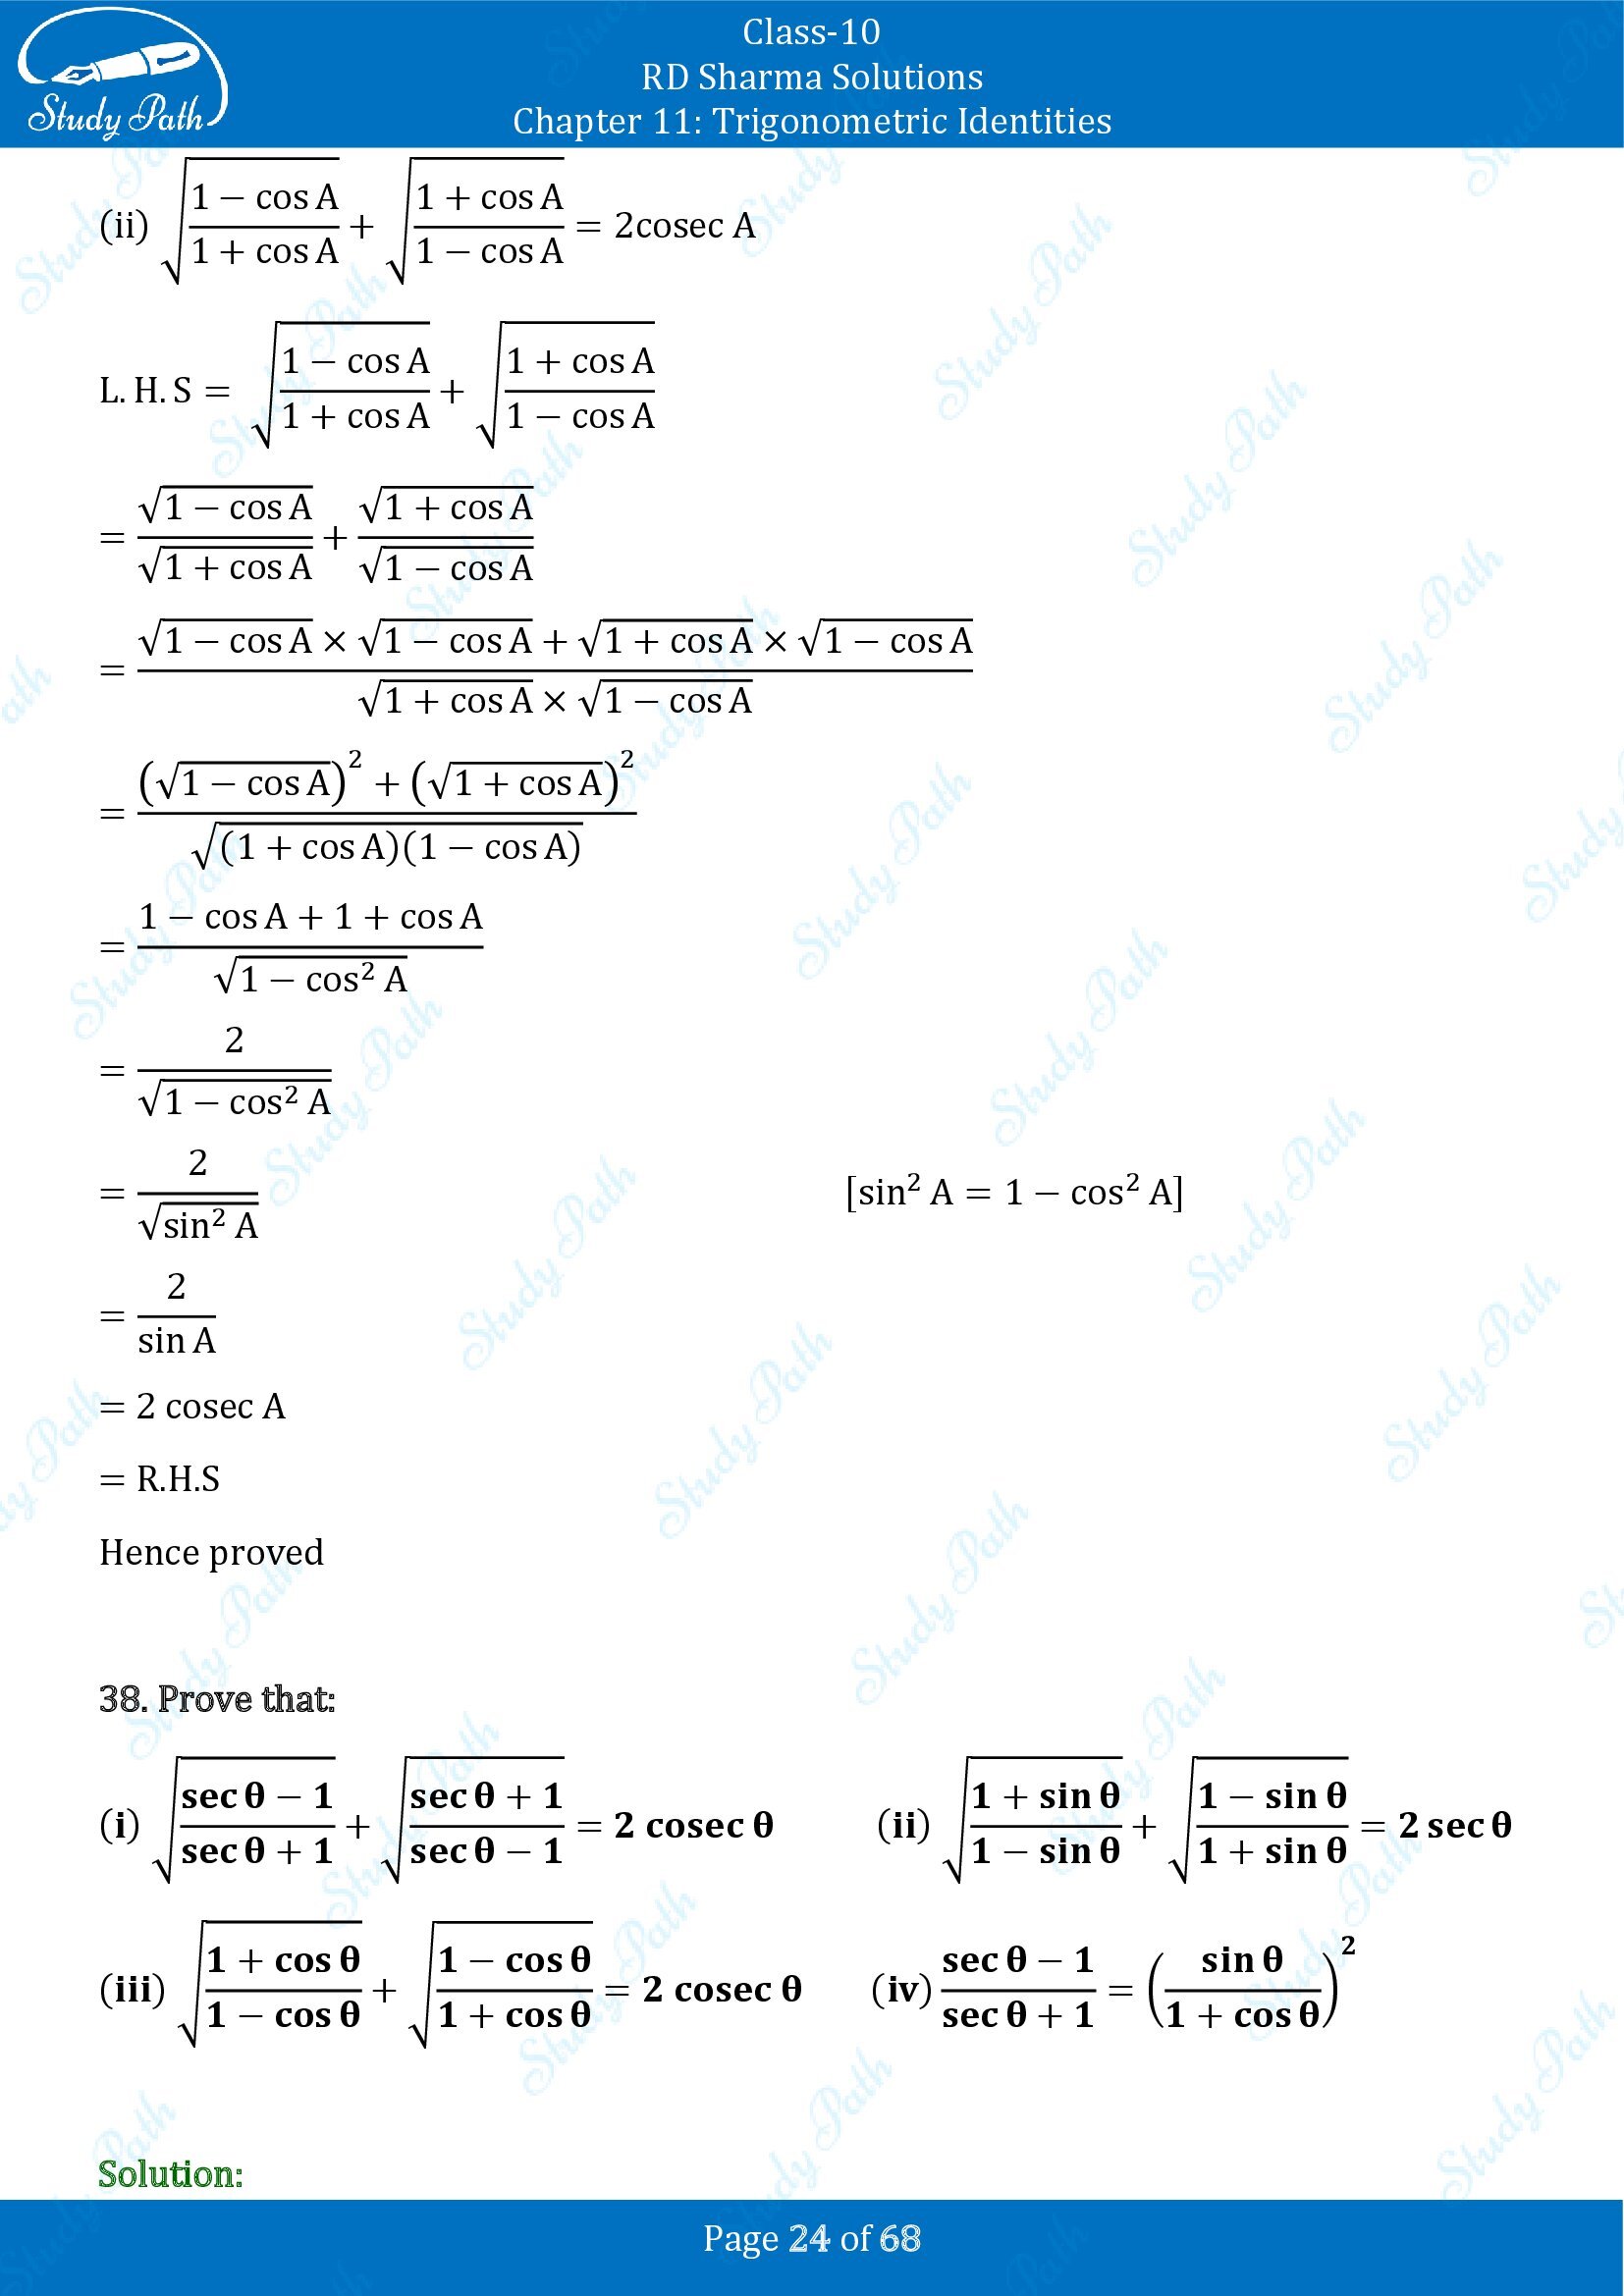 RD Sharma Solutions Class 10 Chapter 11 Trigonometric Identities Exercise 11.1 00024